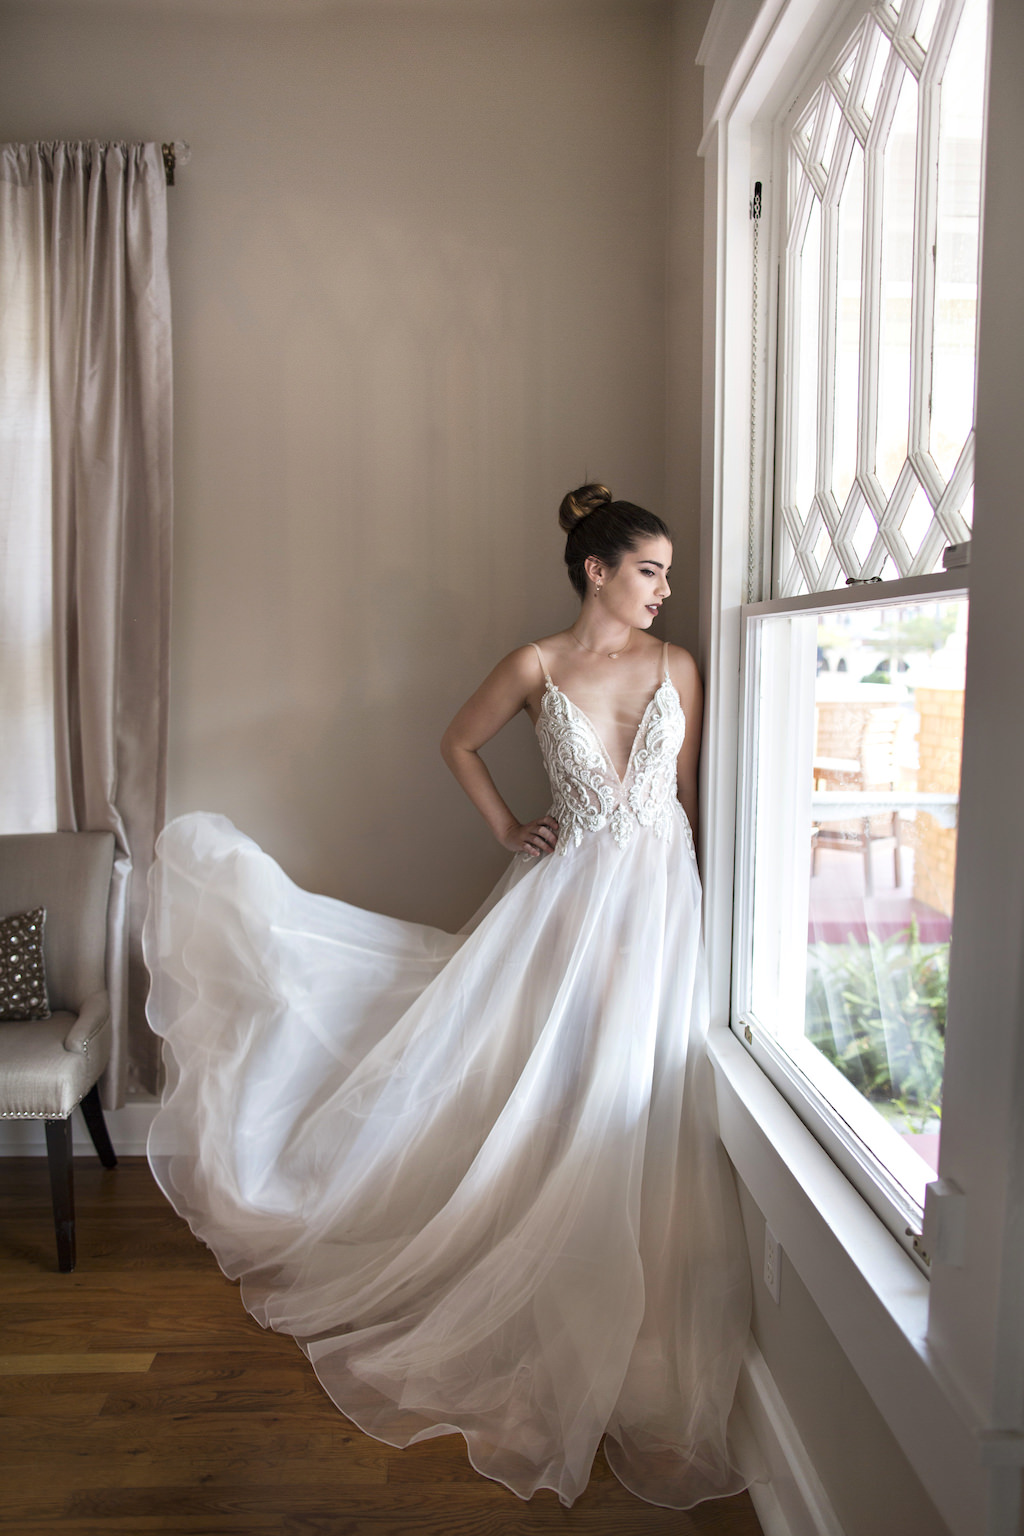 Muse by Berta | The Bride Tampa Bridal Shop | Couture Wedding Dress Salon in Ybor City | Wedding & Fashion Photographer Djmael Photography